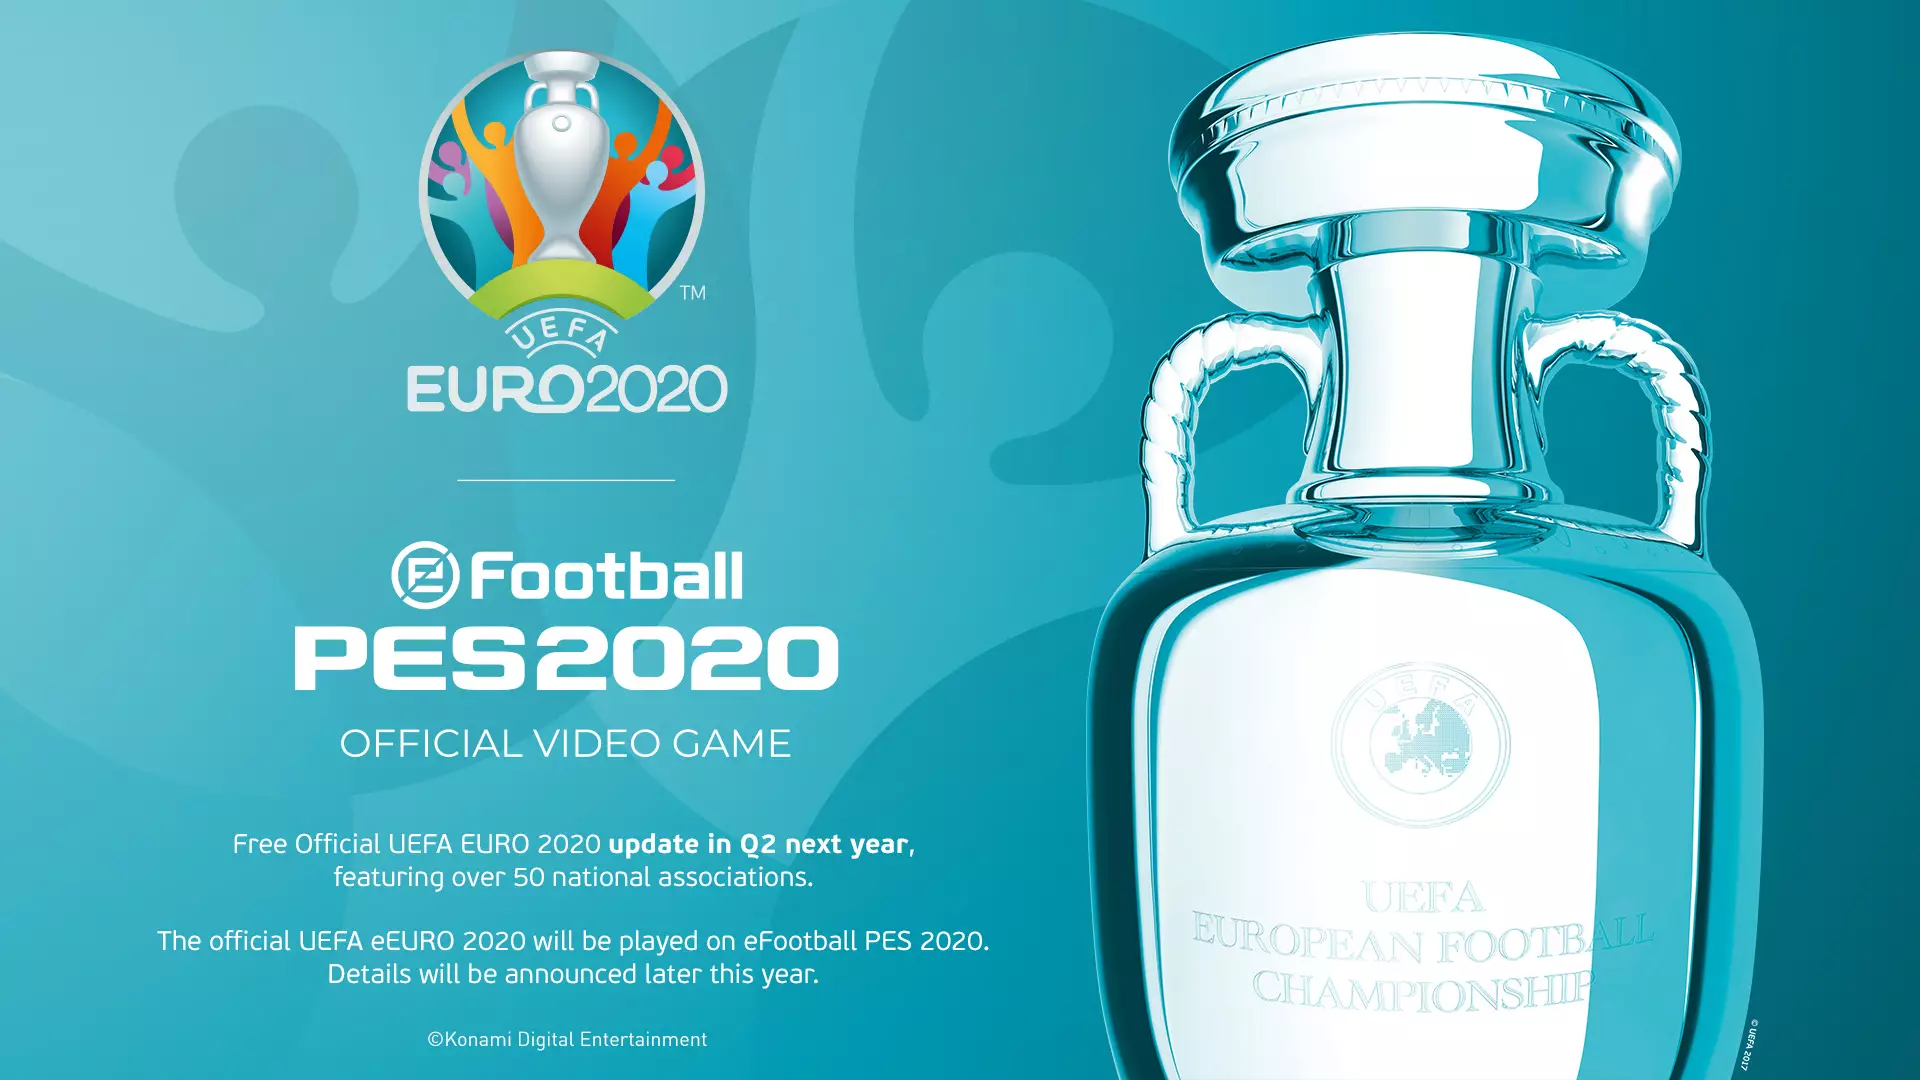 PES 2020 Gets Exclusive Rights To Euro 2020 Tournament In Another Major Blow To FIFA 20